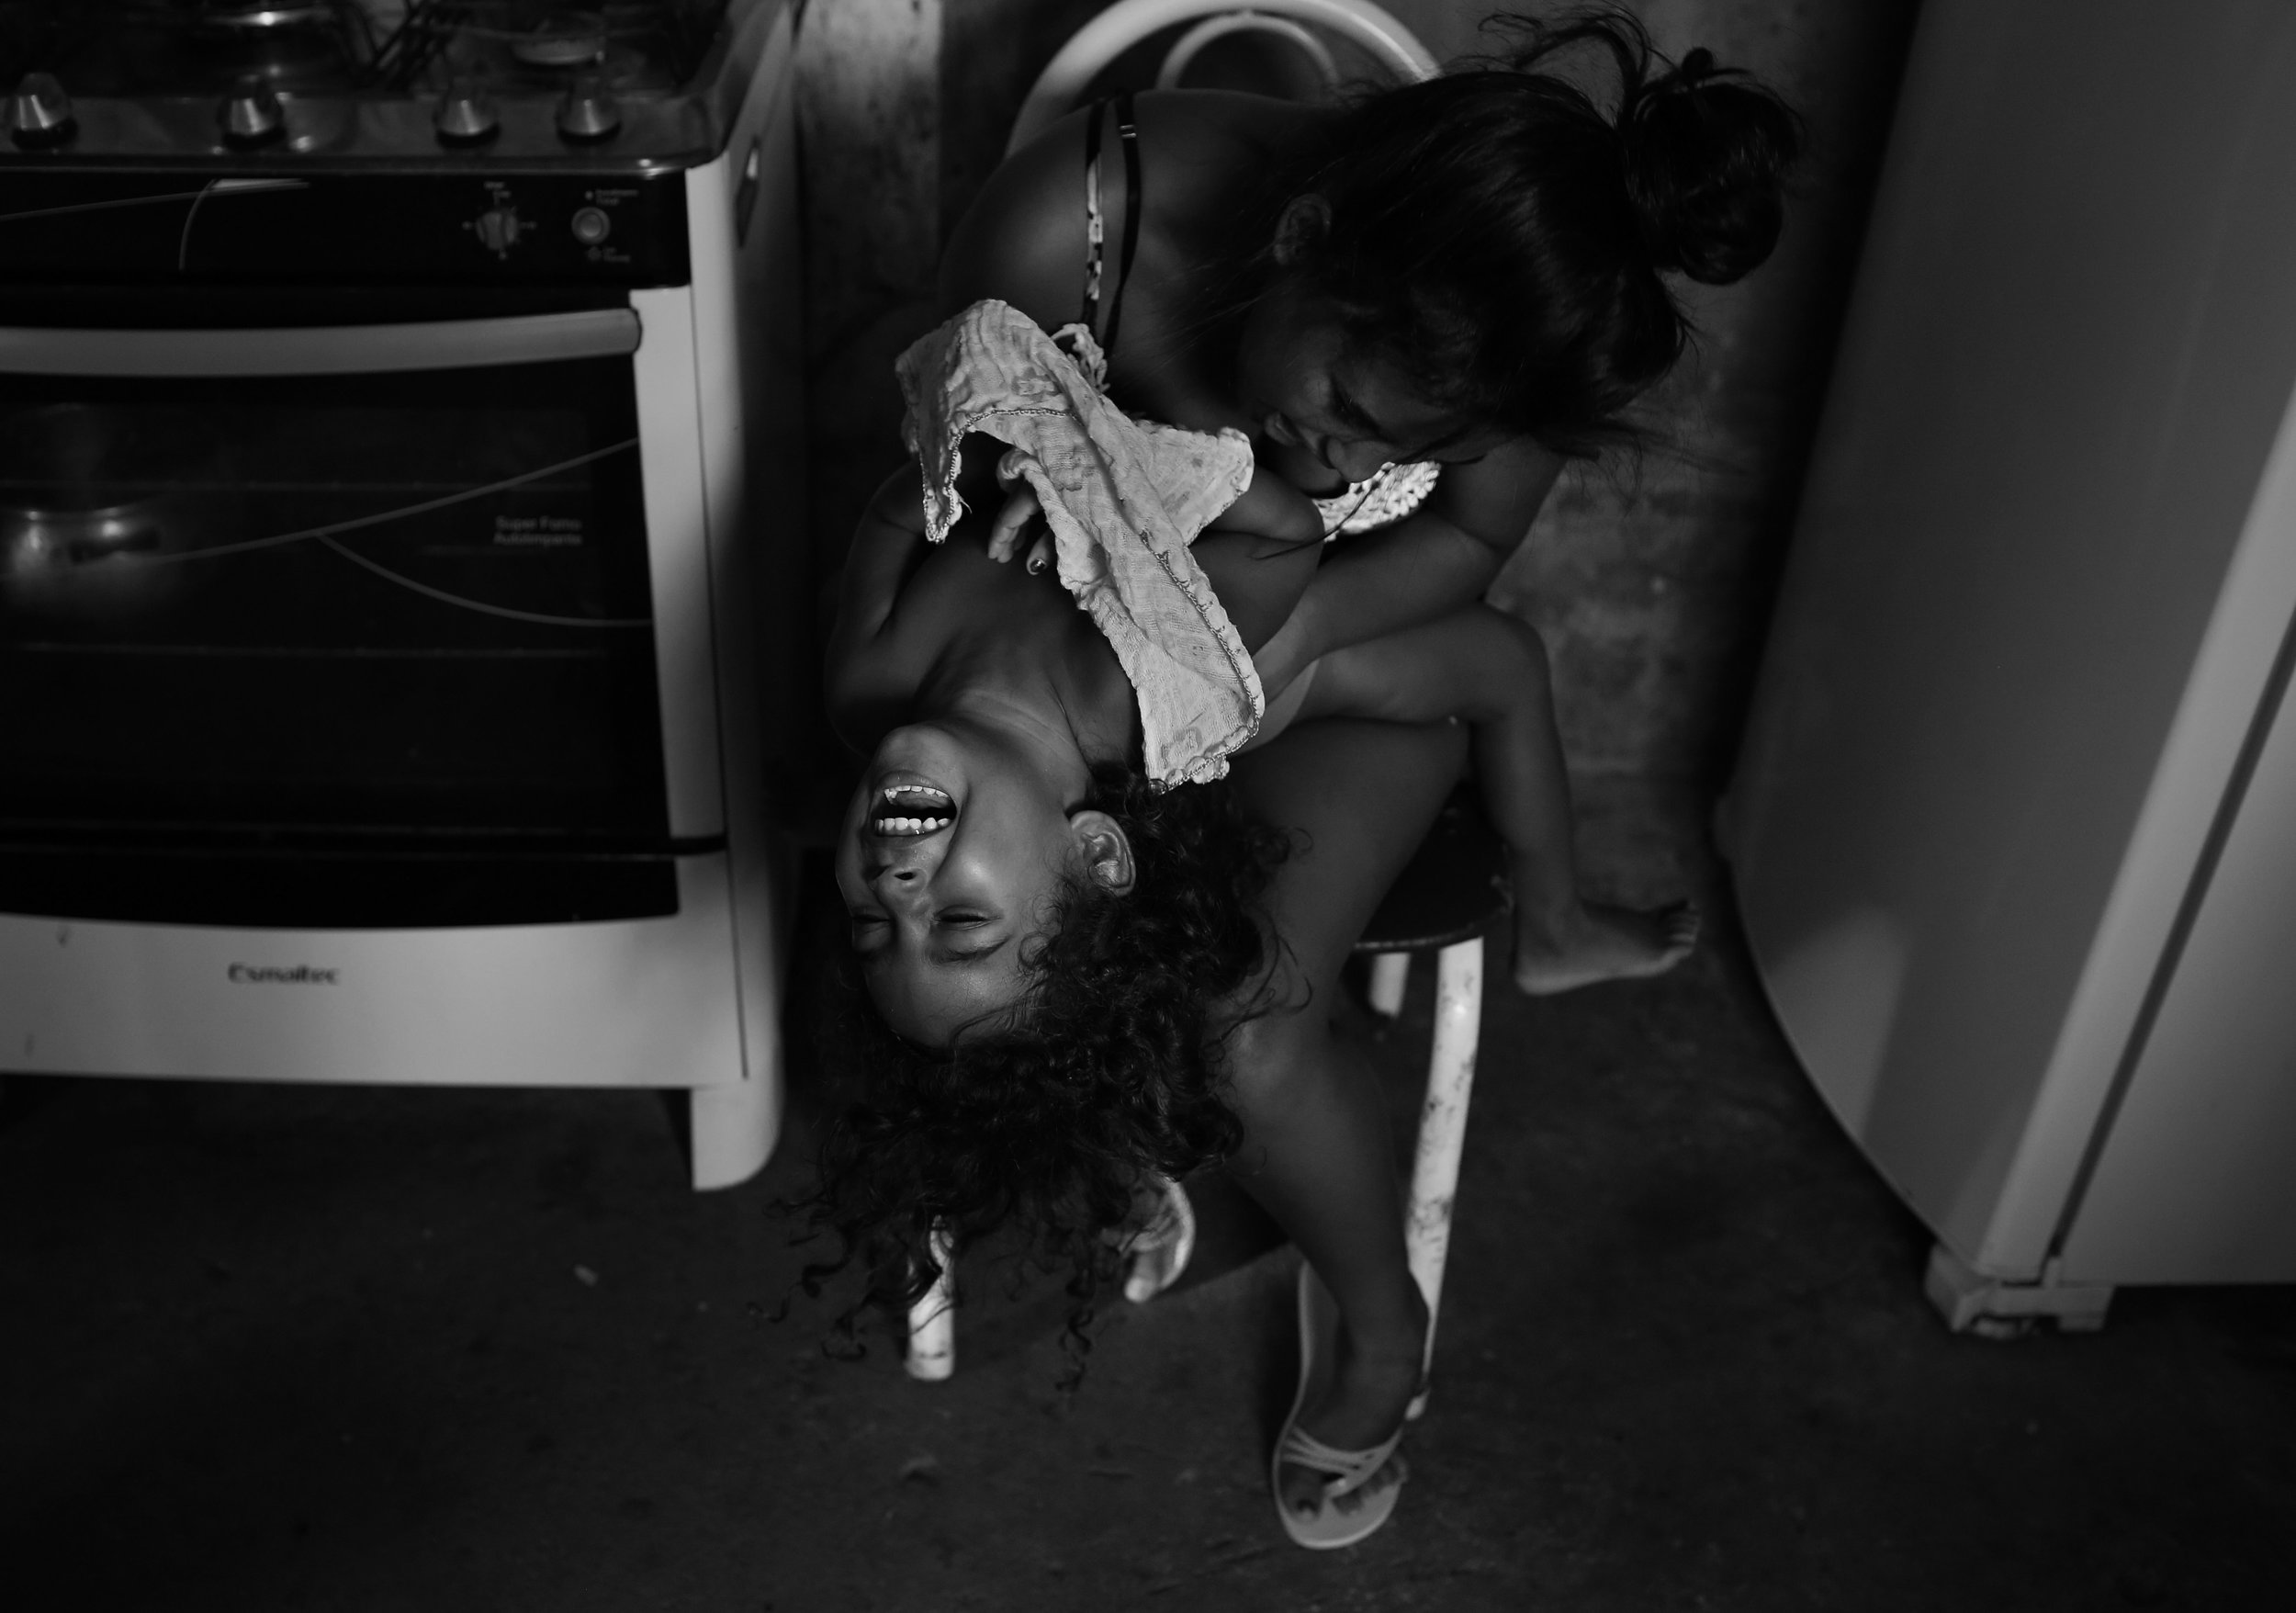  Vivian Amorim, age 4, shrieks with laughter with one of her sisters, Valeria, age 16, in the kitchen of their family’s home. Vivian and Valeria are two of four sisters. Recently a fifth sibling, Samuel, who was born with microcephaly, joined the fam